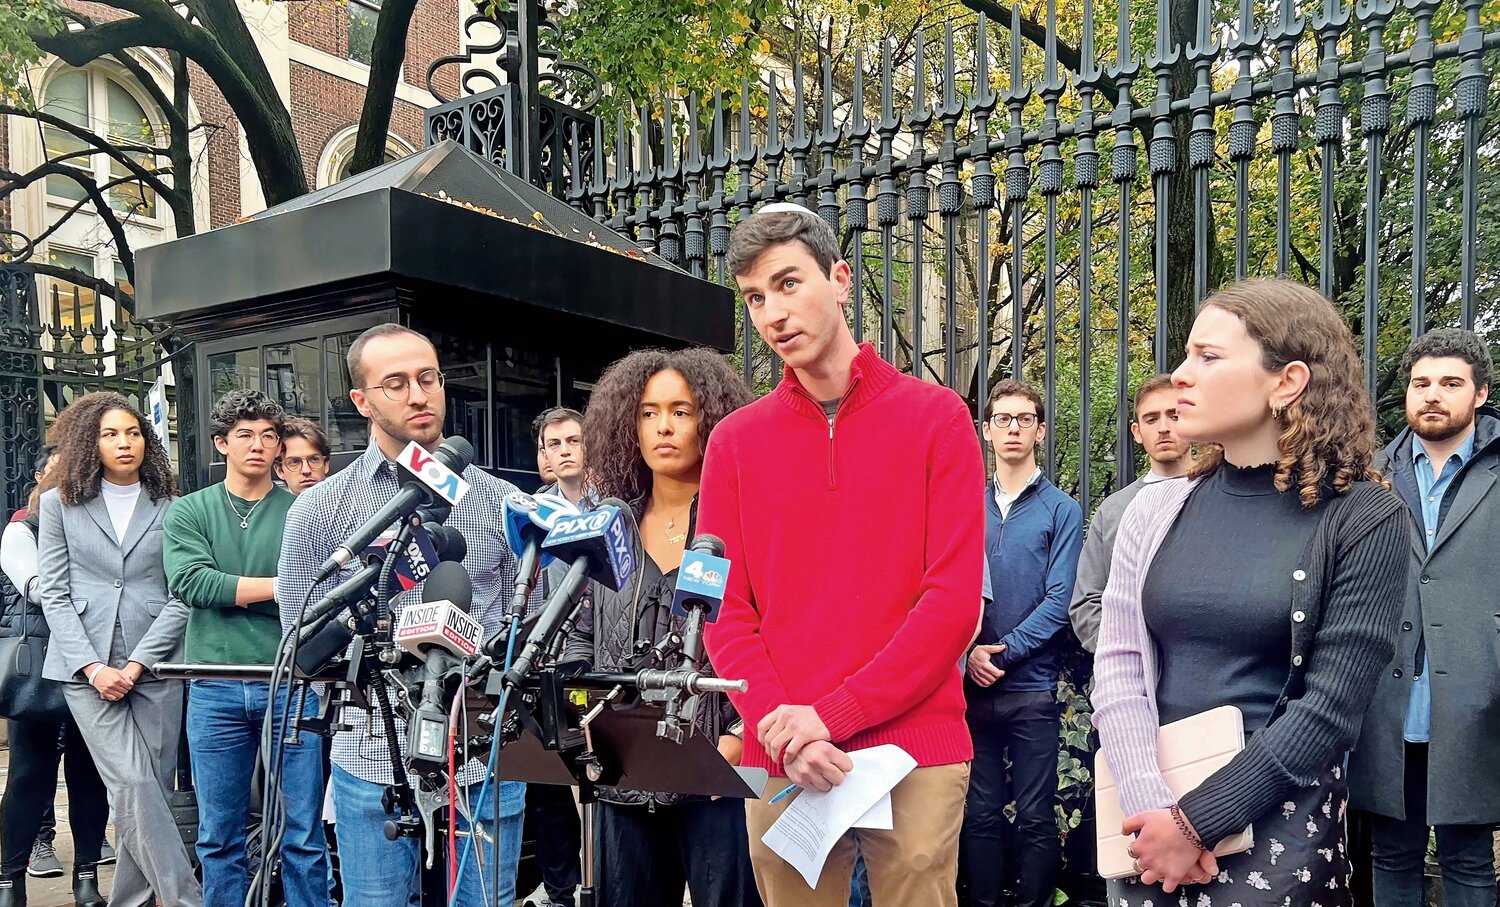 Students Eli Shmidman, Noa Fay, Yoni Kurtz and Jessie Brenner call on Columbia University to support students targeted by bold expressions of antisemitism on the Columbia and Barnard campus.